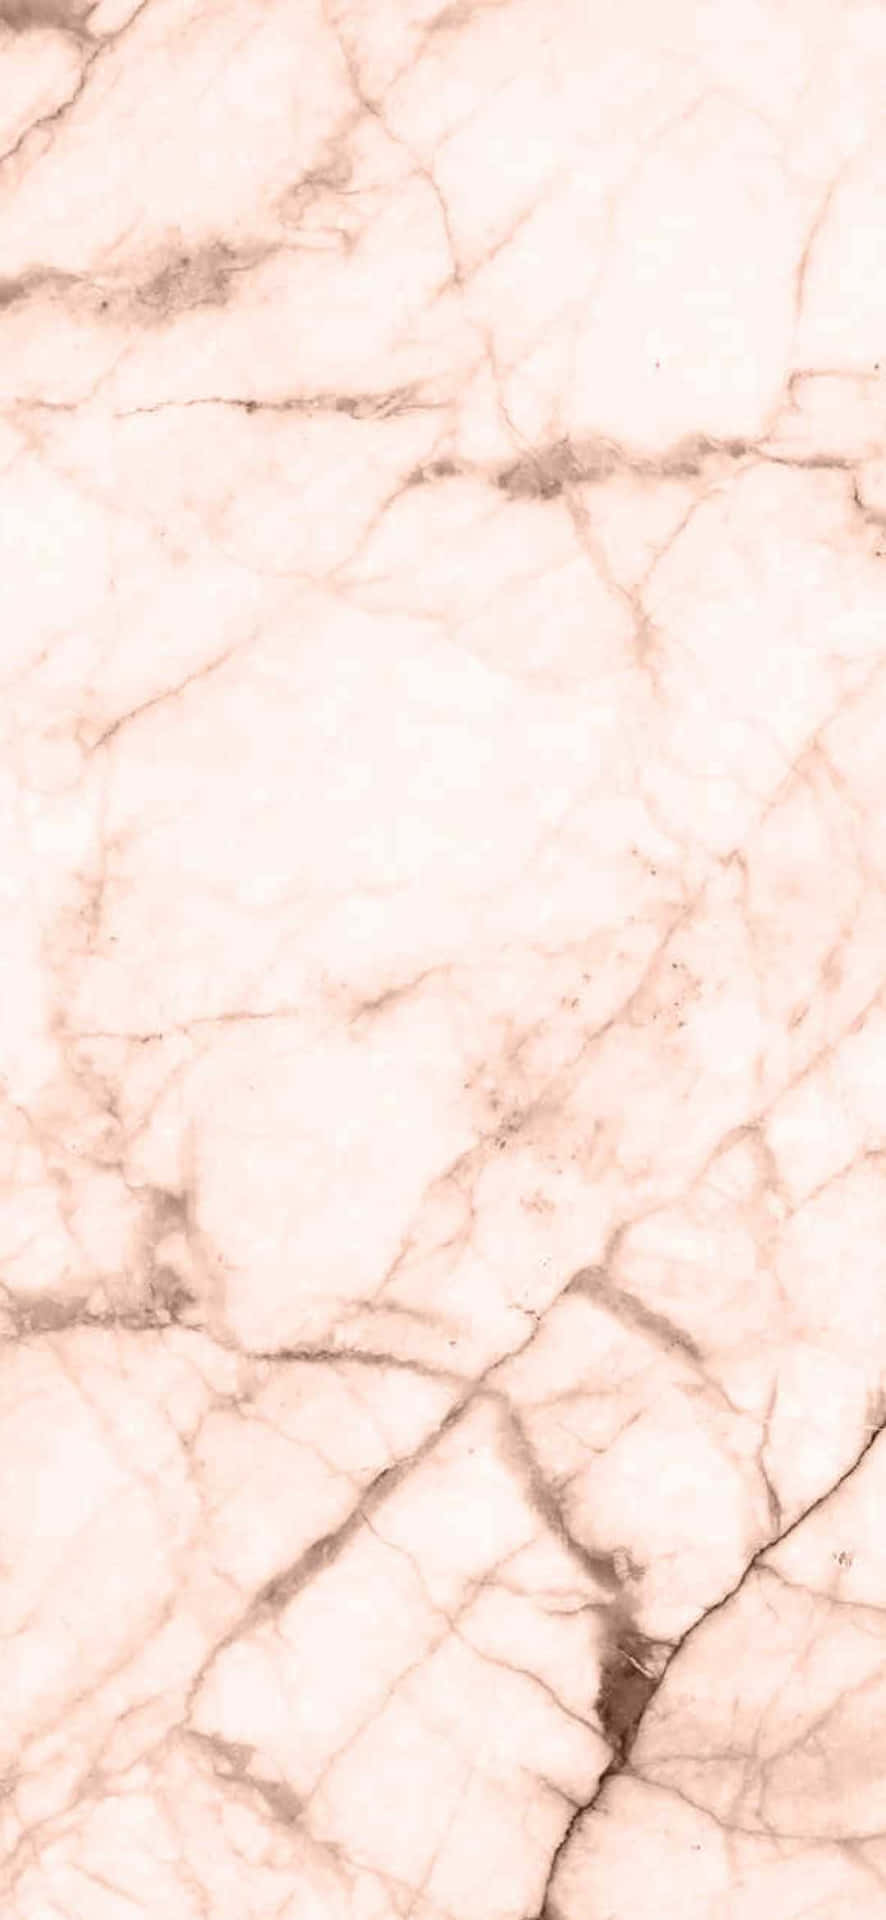 Sophistication and Functionality Meet in the Marble iPad Wallpaper